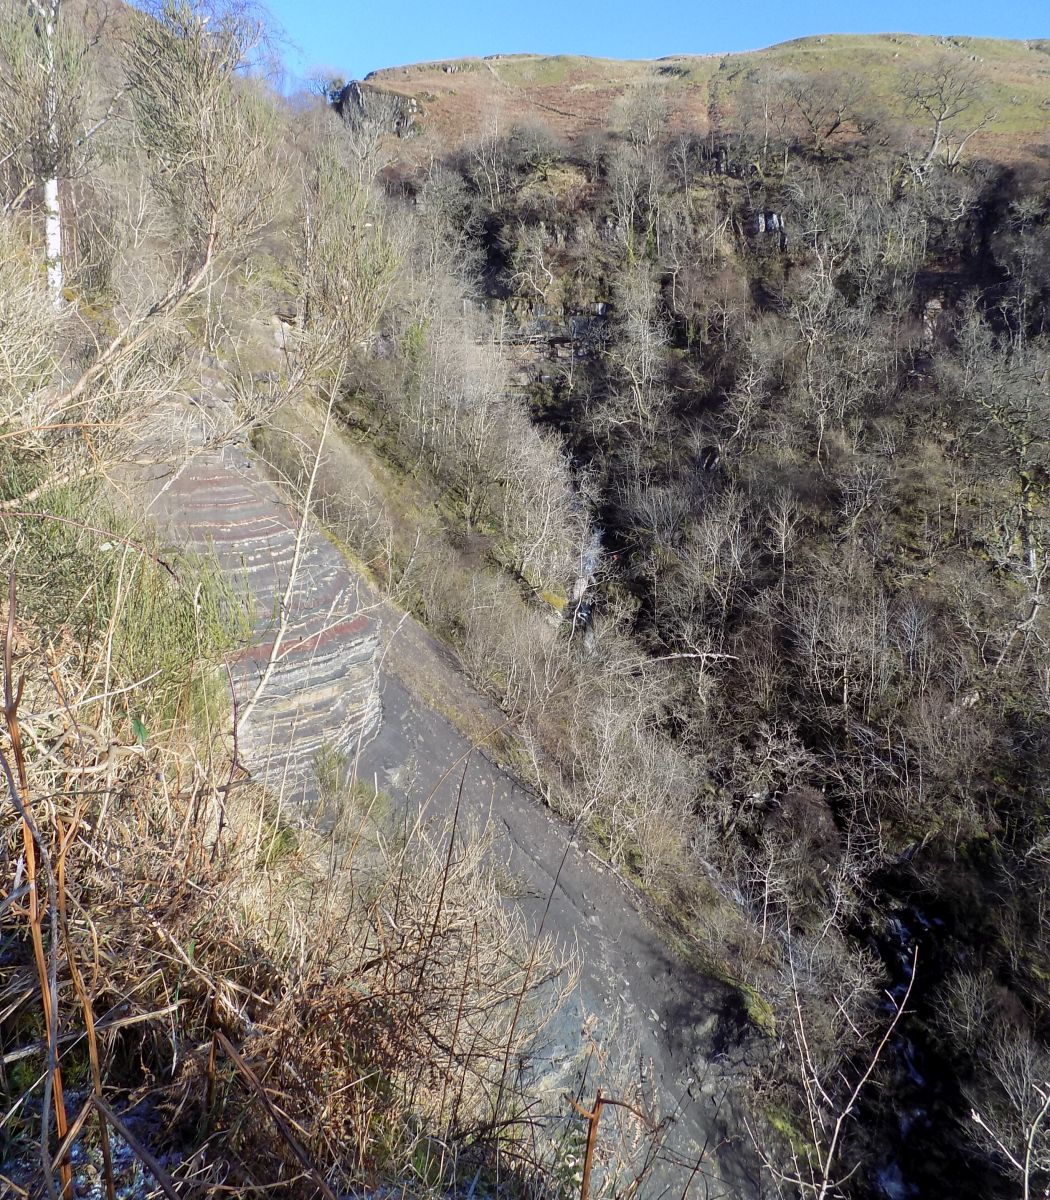 The steep narrow ravine carved out by the Ballagan Burn